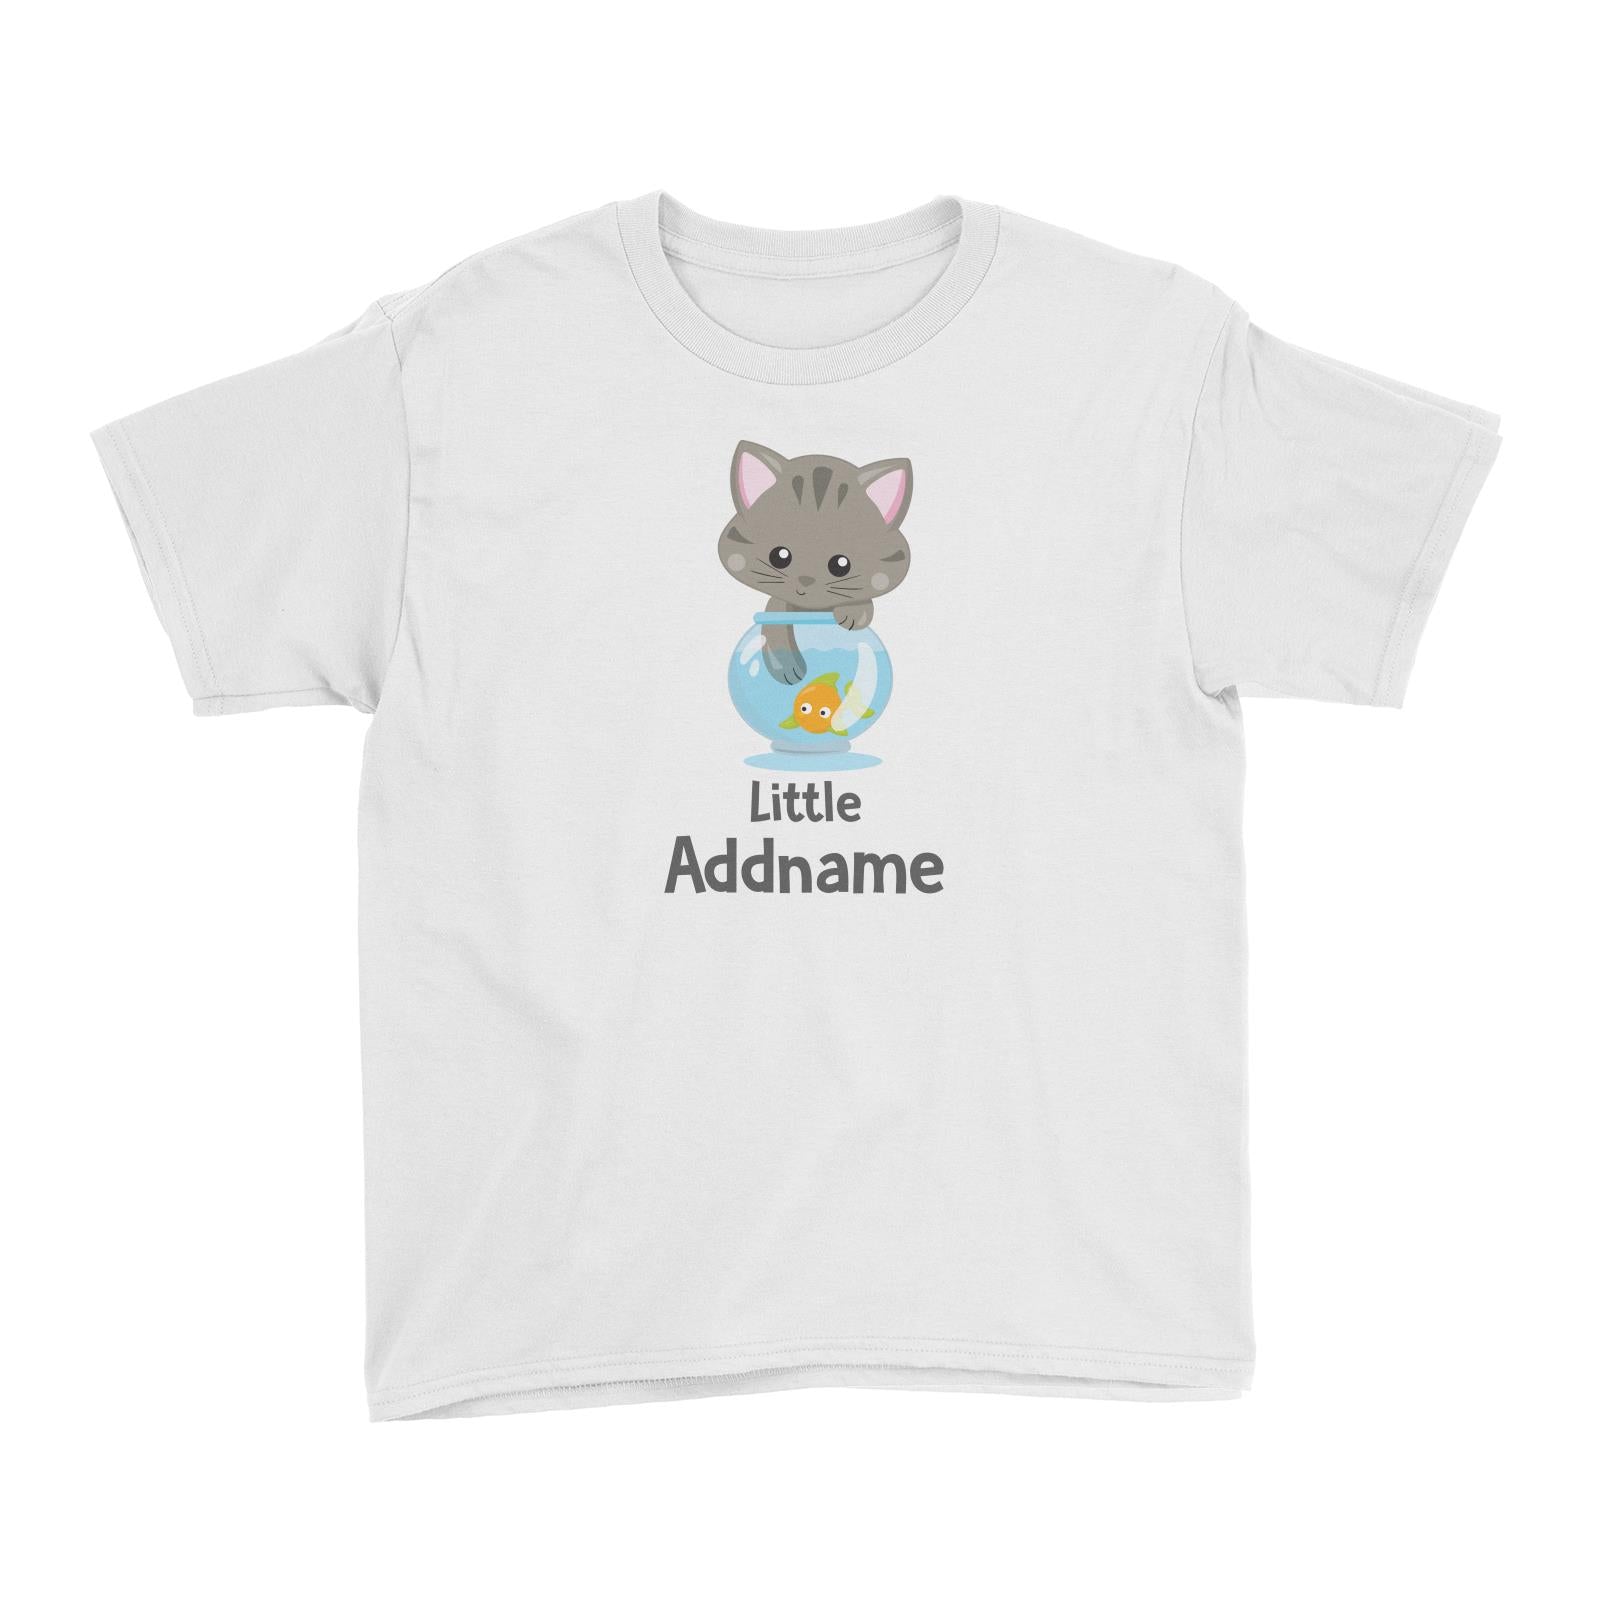 Adorable Cats Grey Cat Playing With Fish Bowl Little Addname Kid's T-Shirt